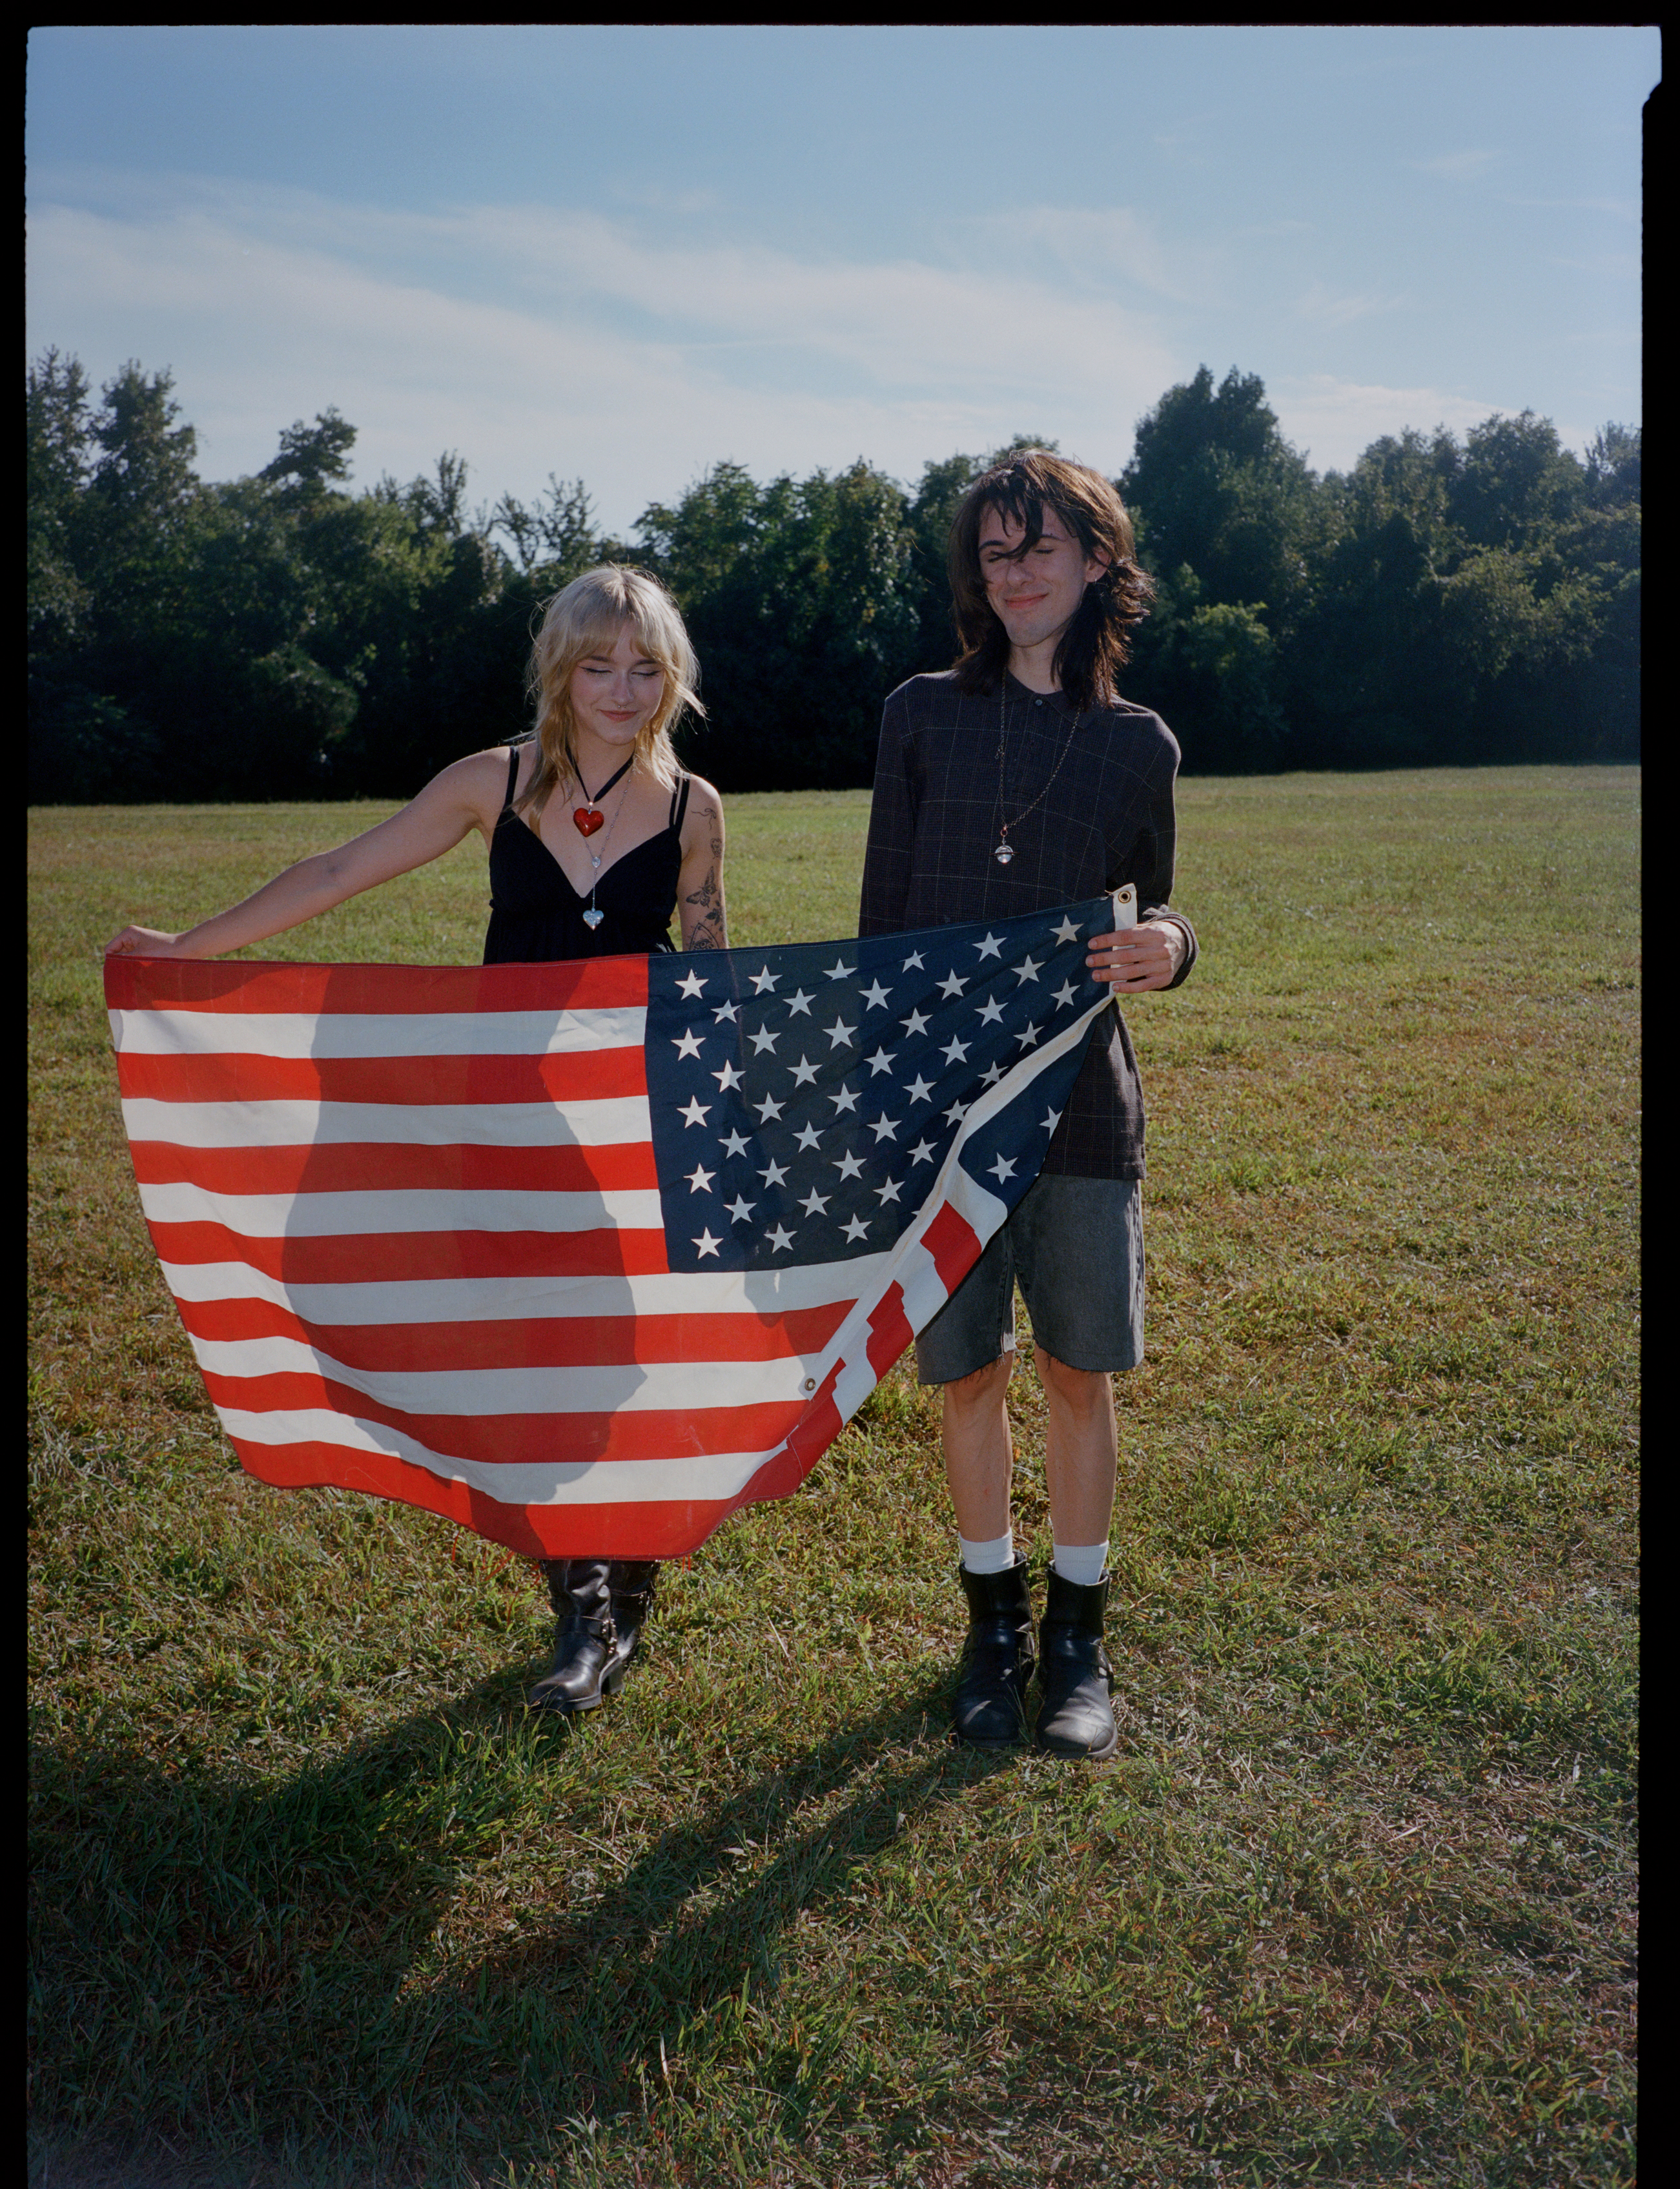 two lana del rey fans stand side-by-side, carrying a united states of america flag